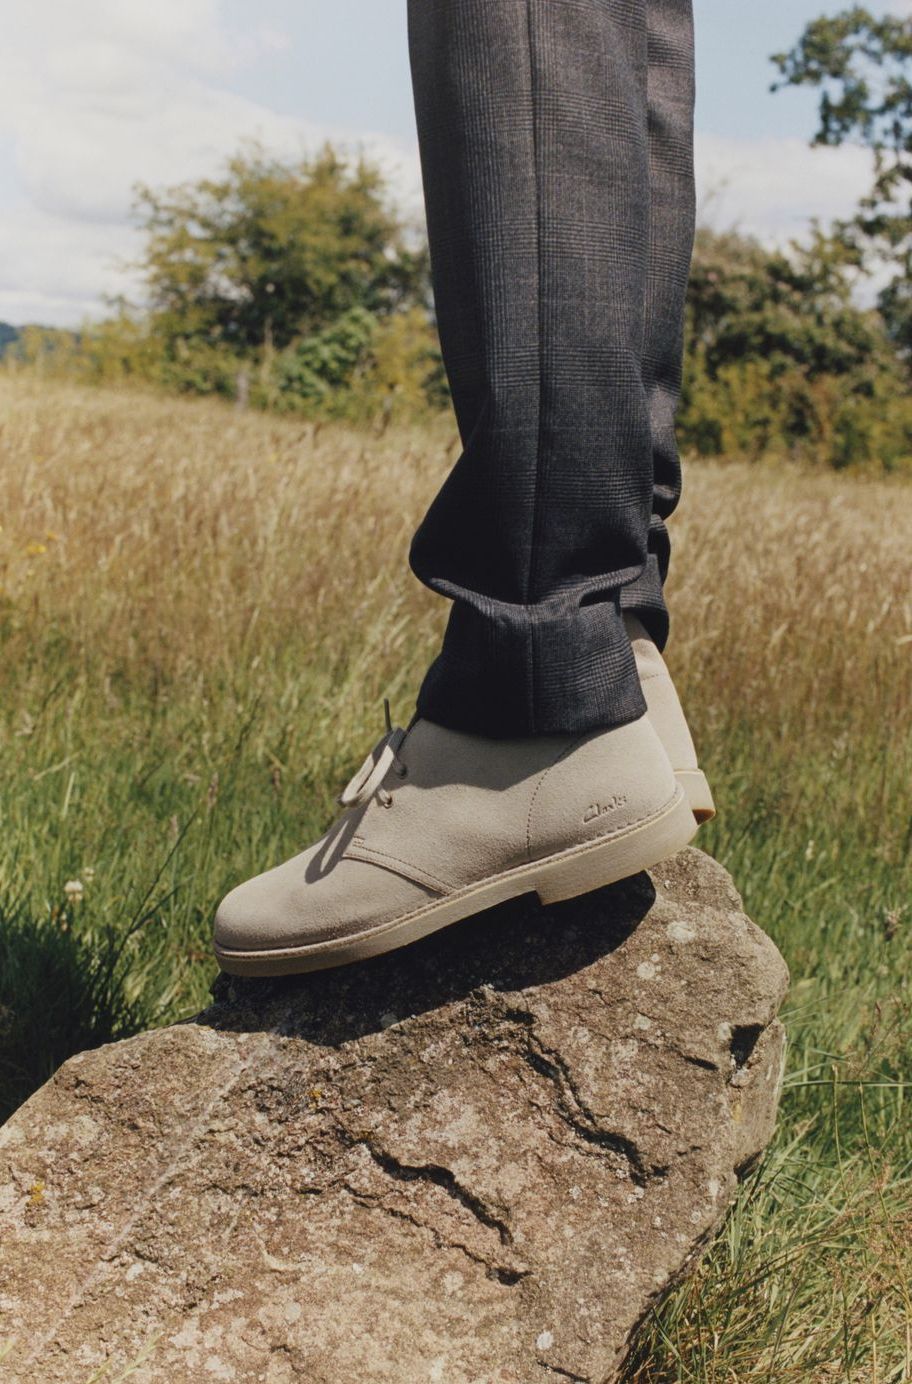 How the Clarks Desert Boot Heritage With Innovation